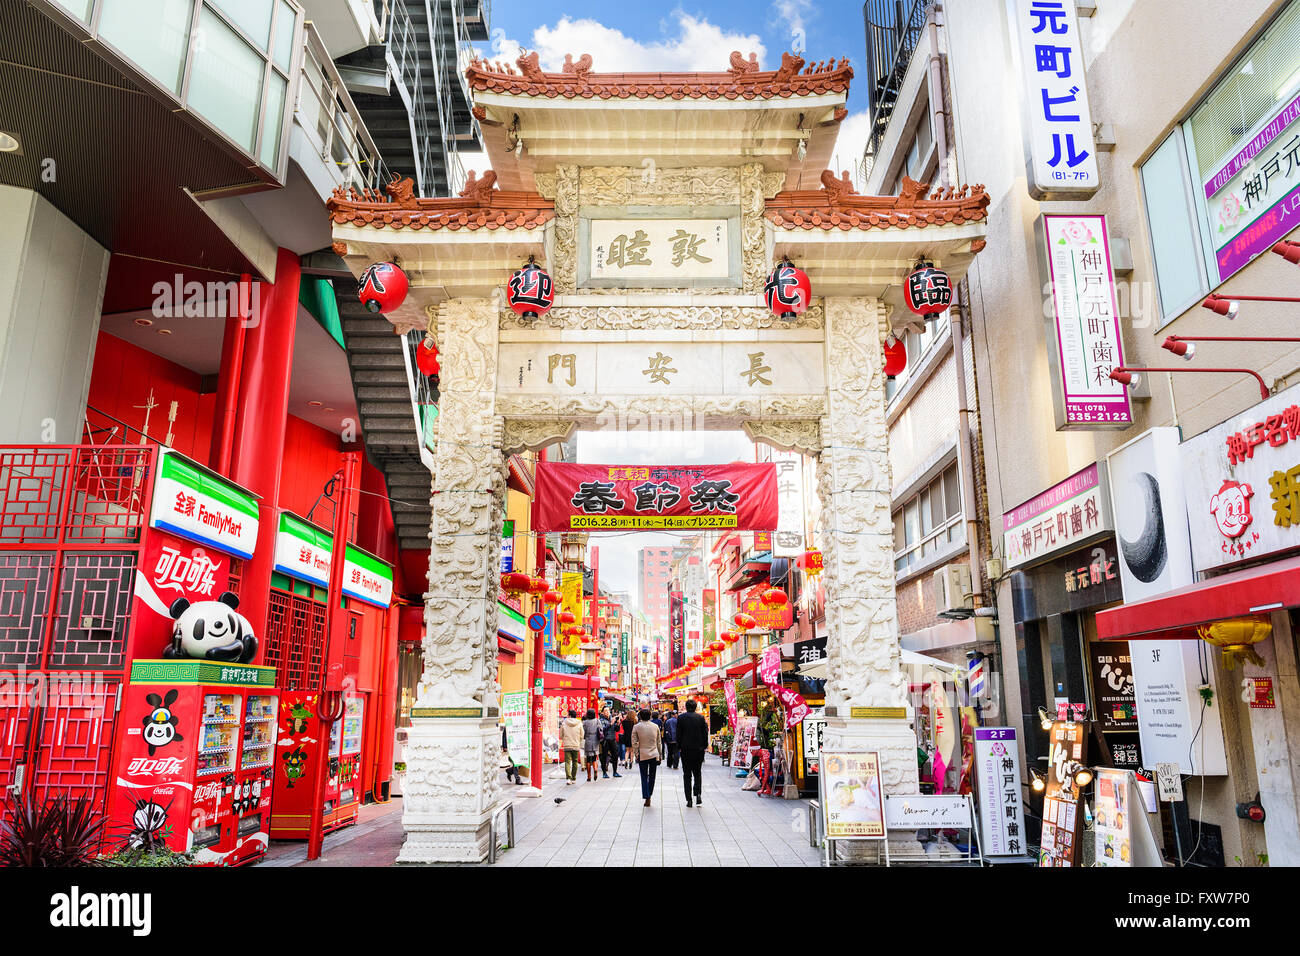 KOBE, JAPAN - DECEMBER 17, 2015: Chinatown district of Kobe at the main gate. It is one of three designated Chinatowns in Japan. Stock Photo